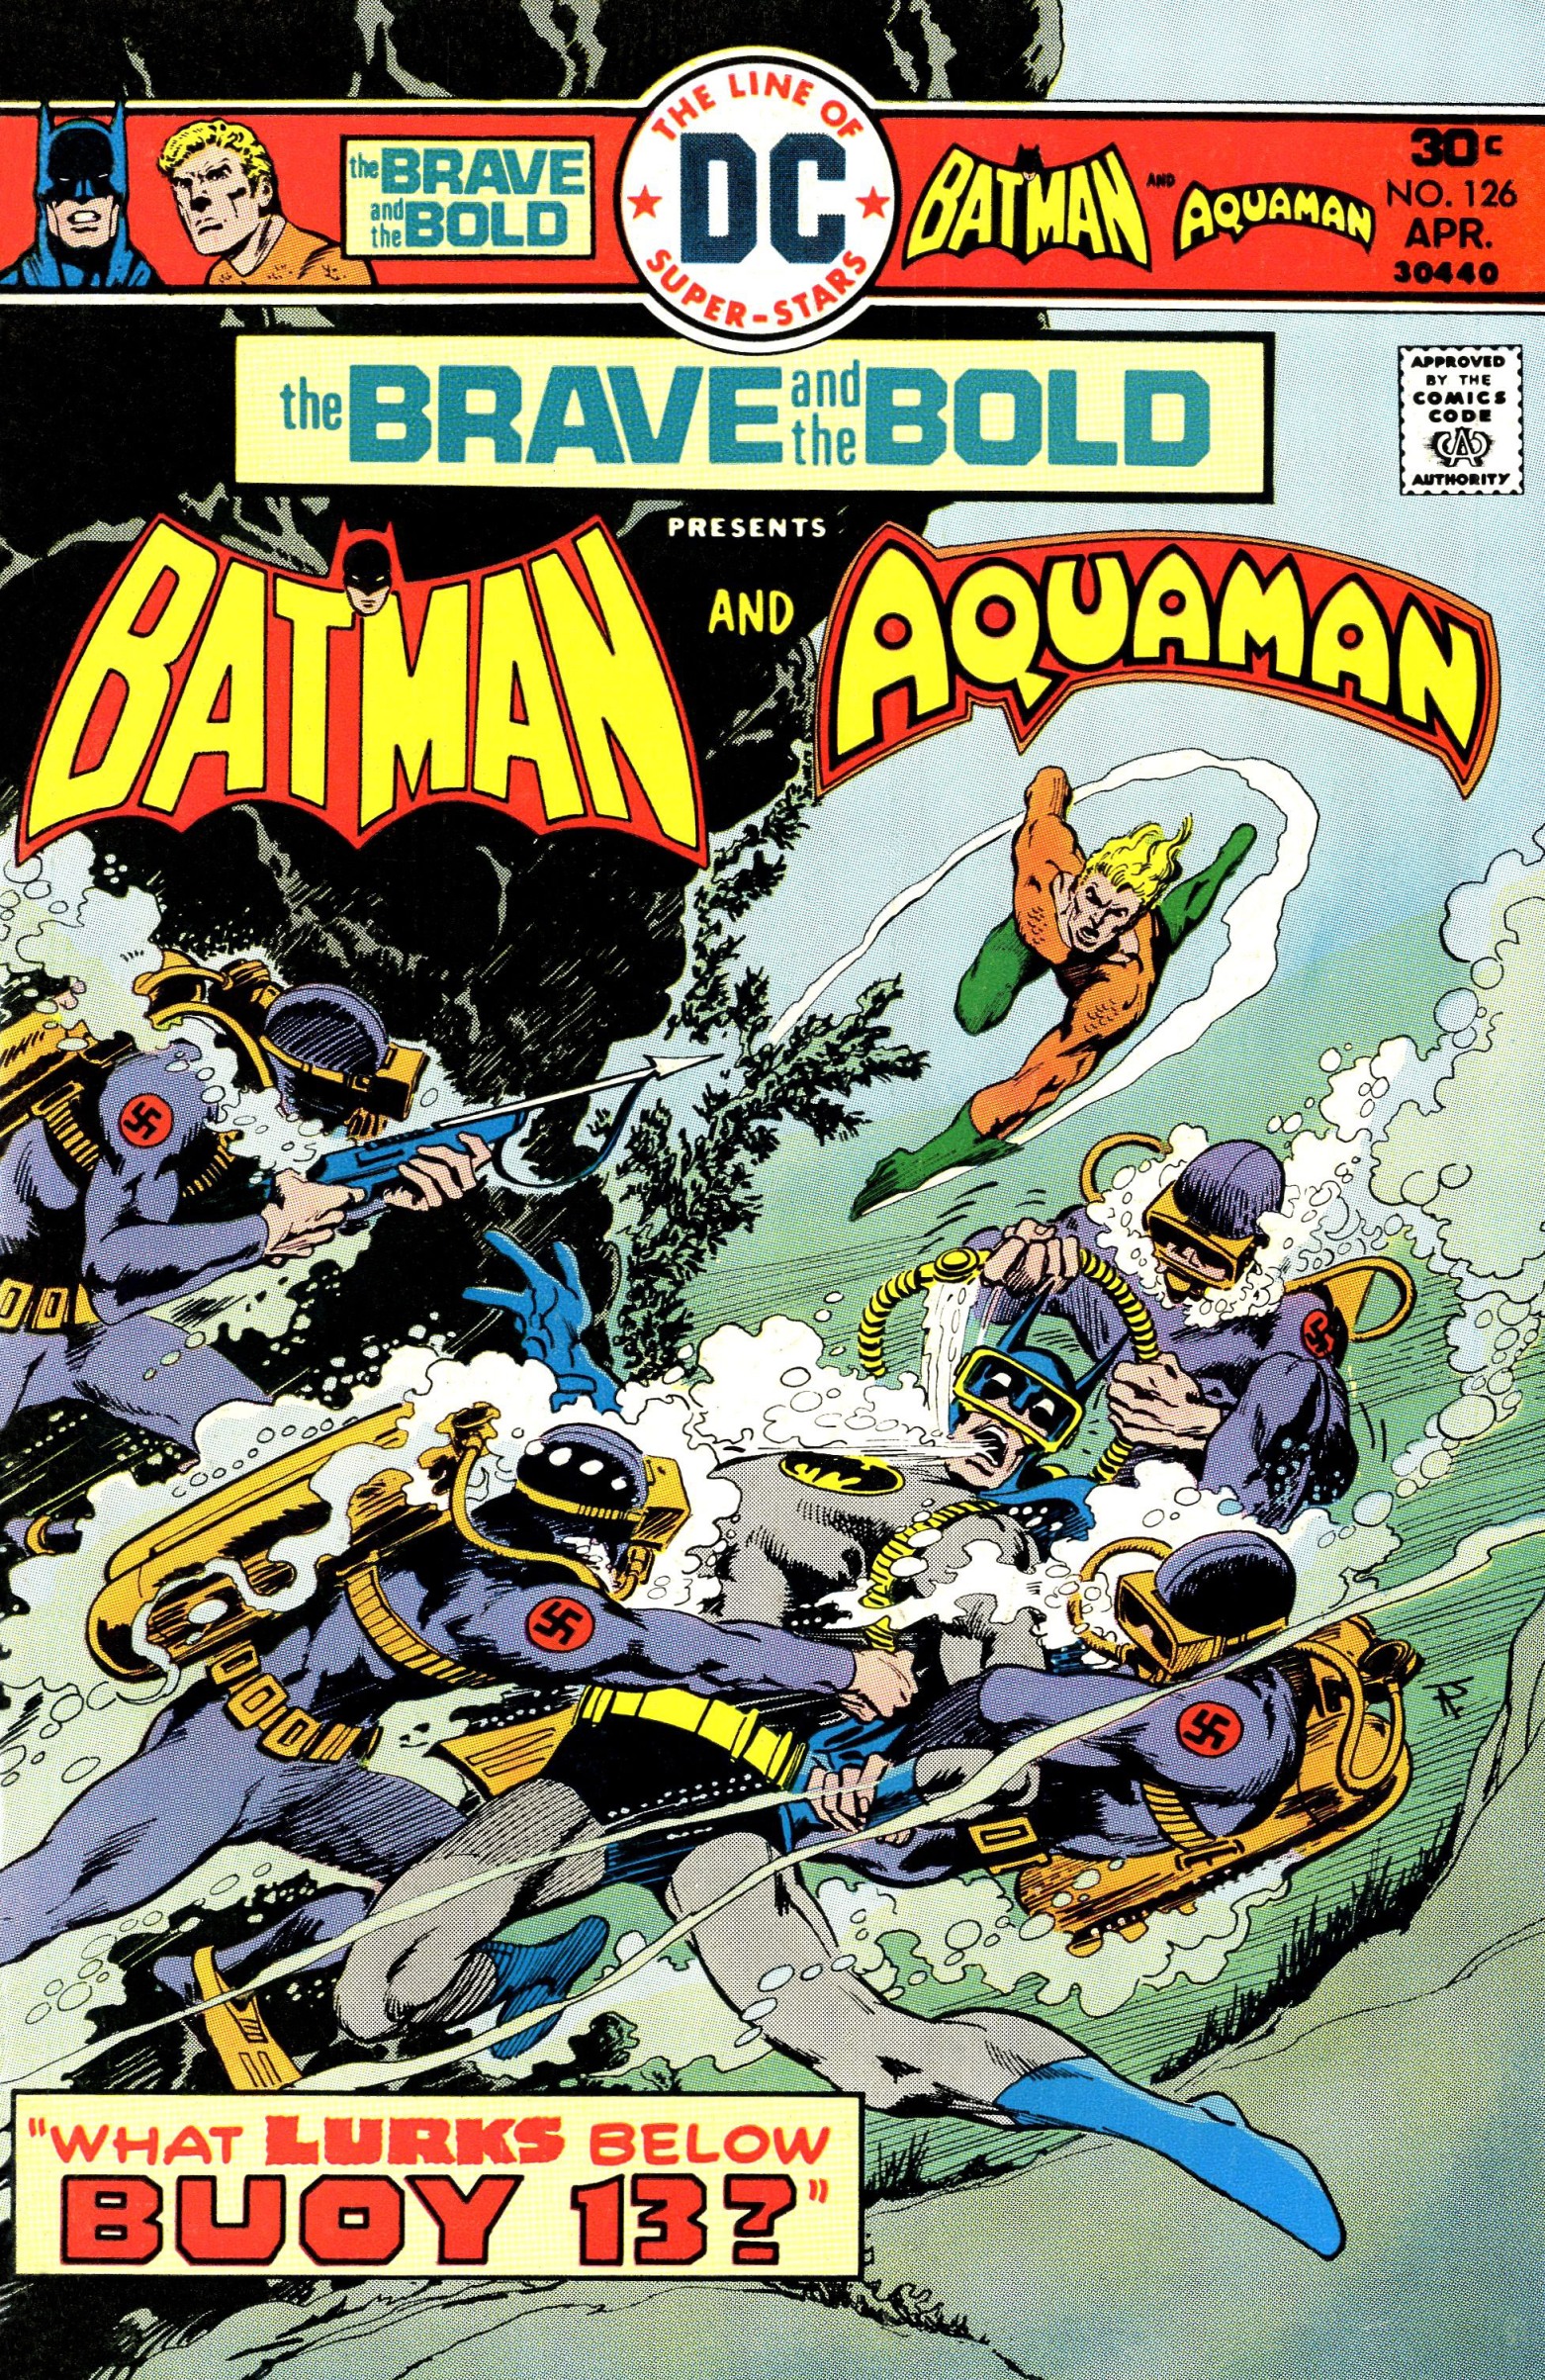 The Brave And The Bold Vol 1 126 Dc Database Fandom 9009